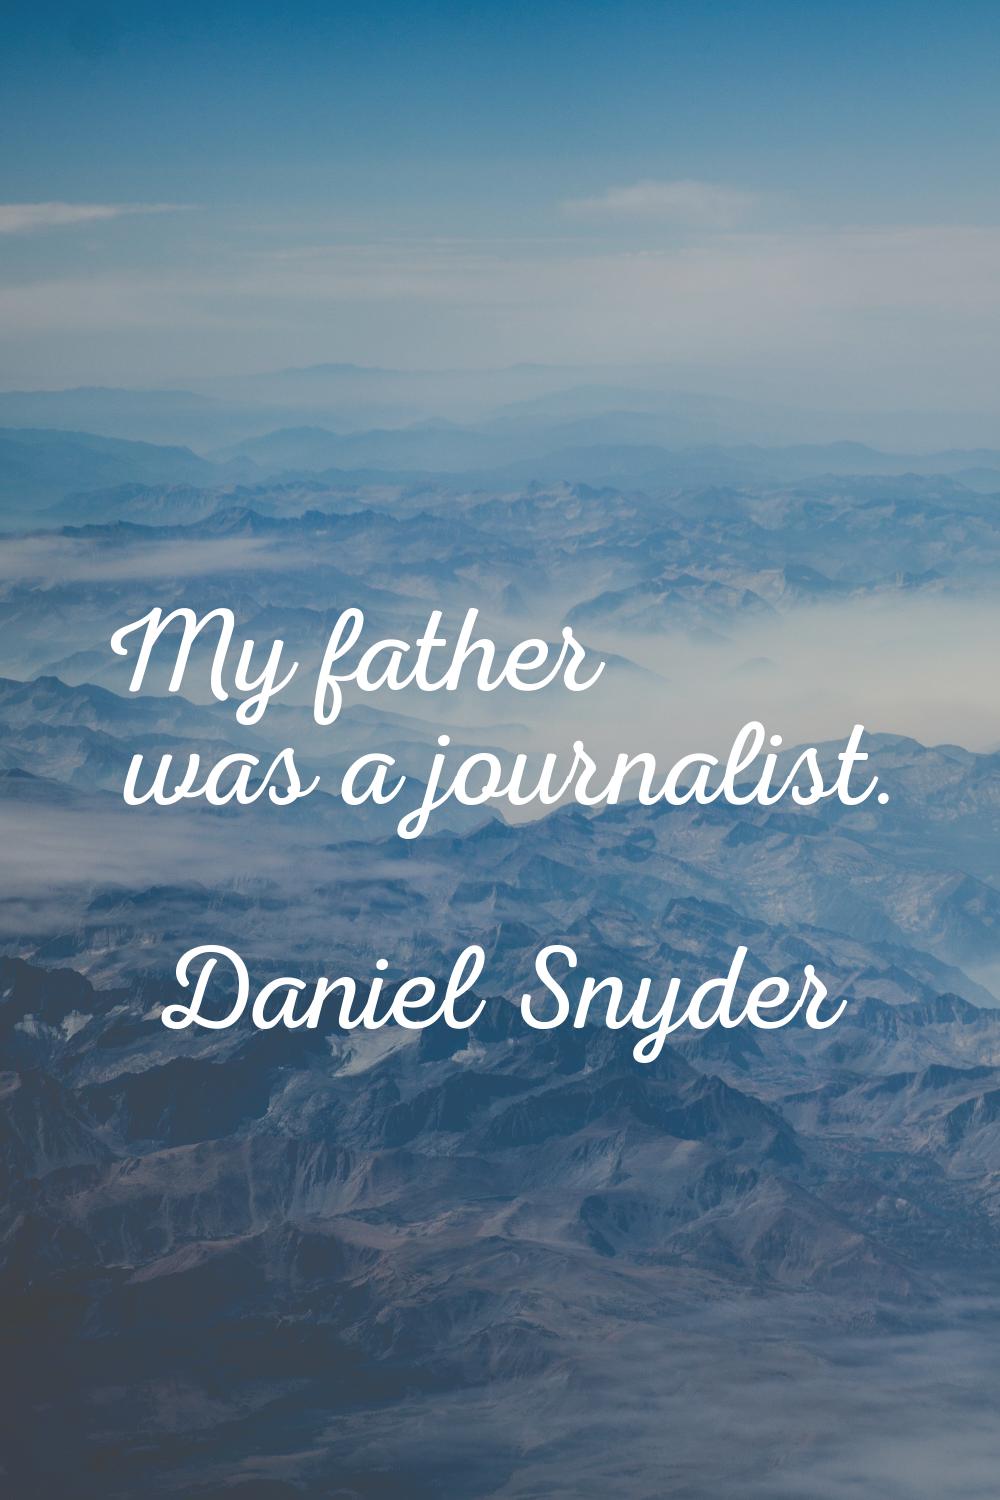 My father was a journalist.